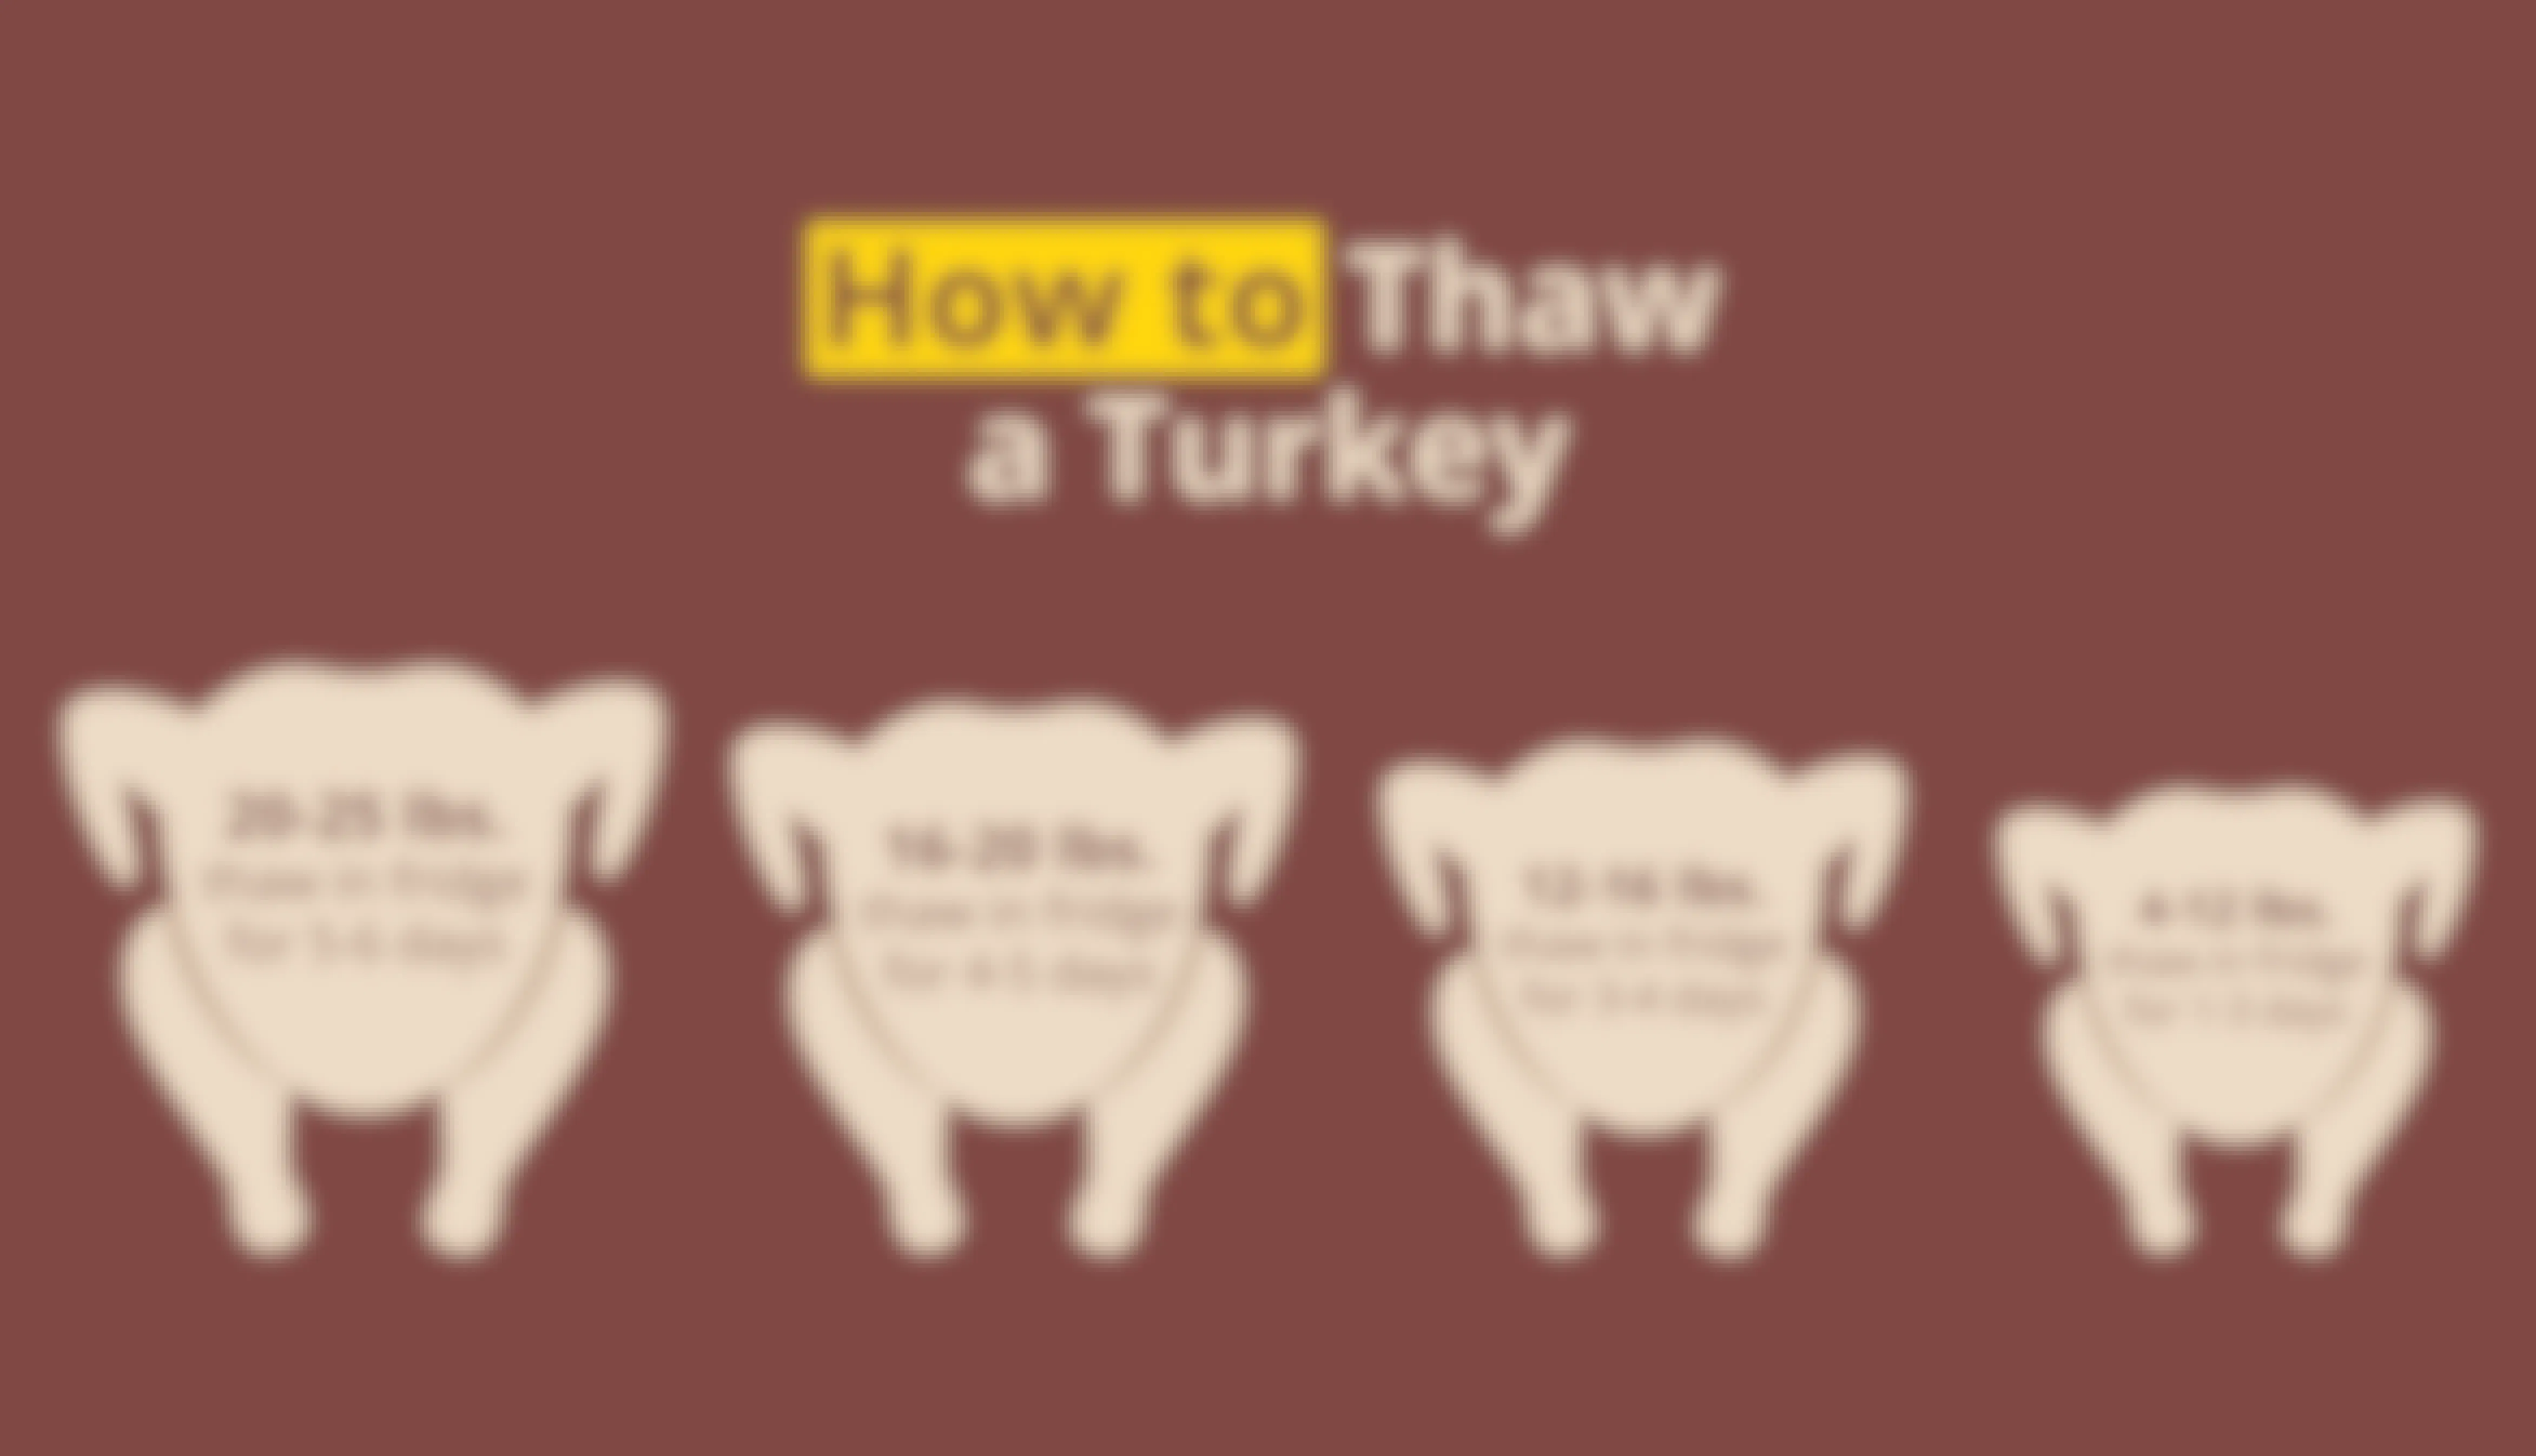 How to thaw a turkey based on size